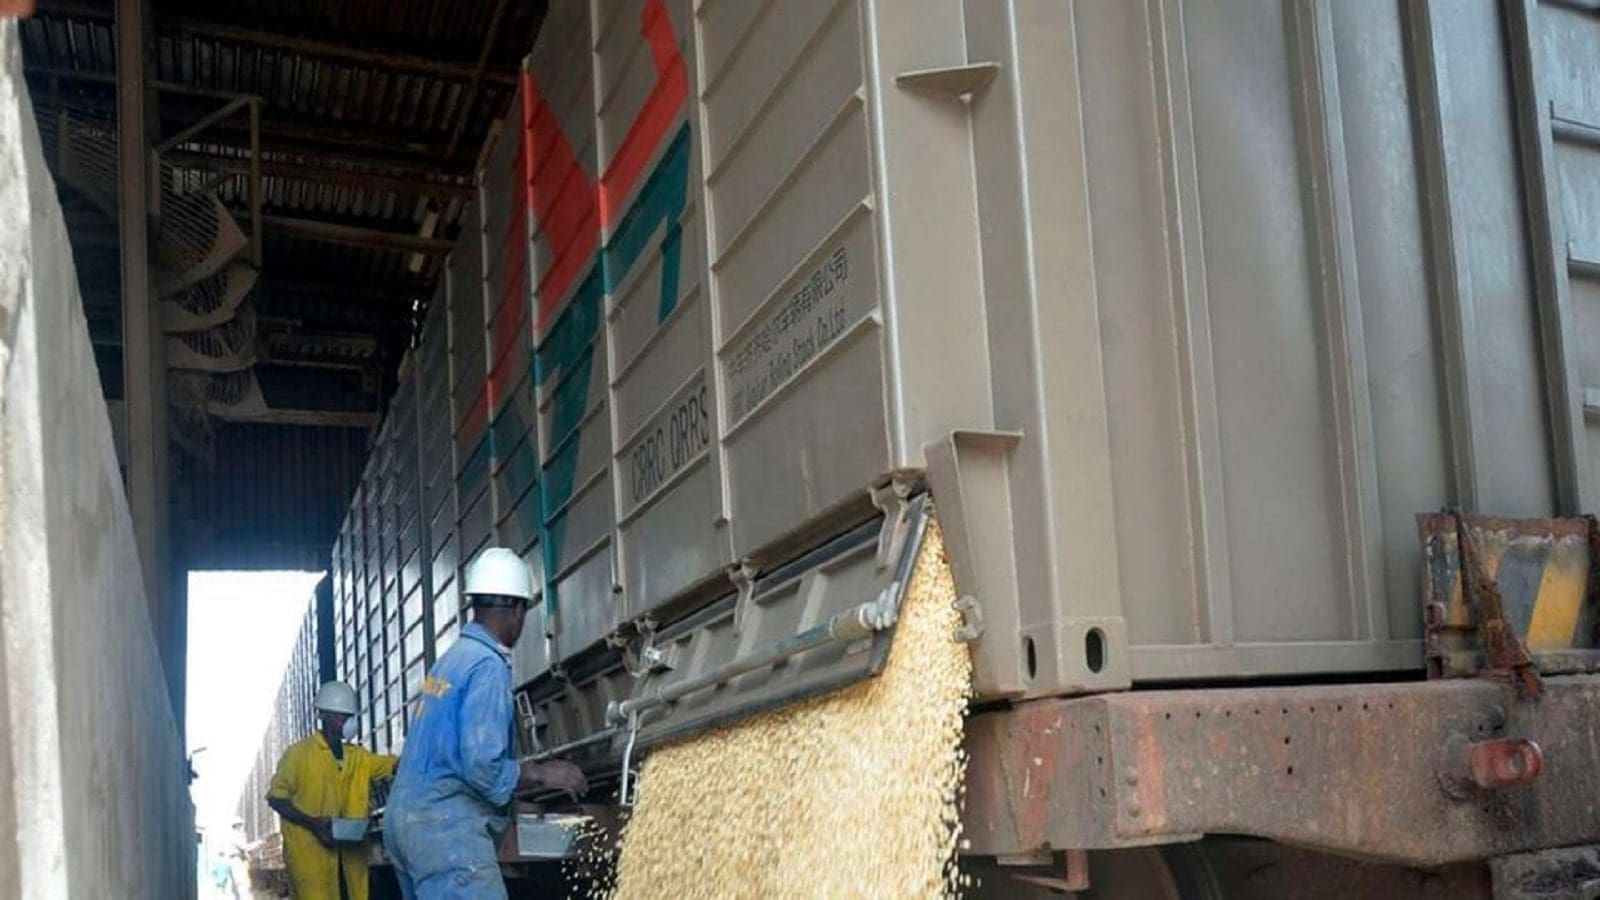 Kenya to compete with China for maize in traditional source market creating fears of supply crunch